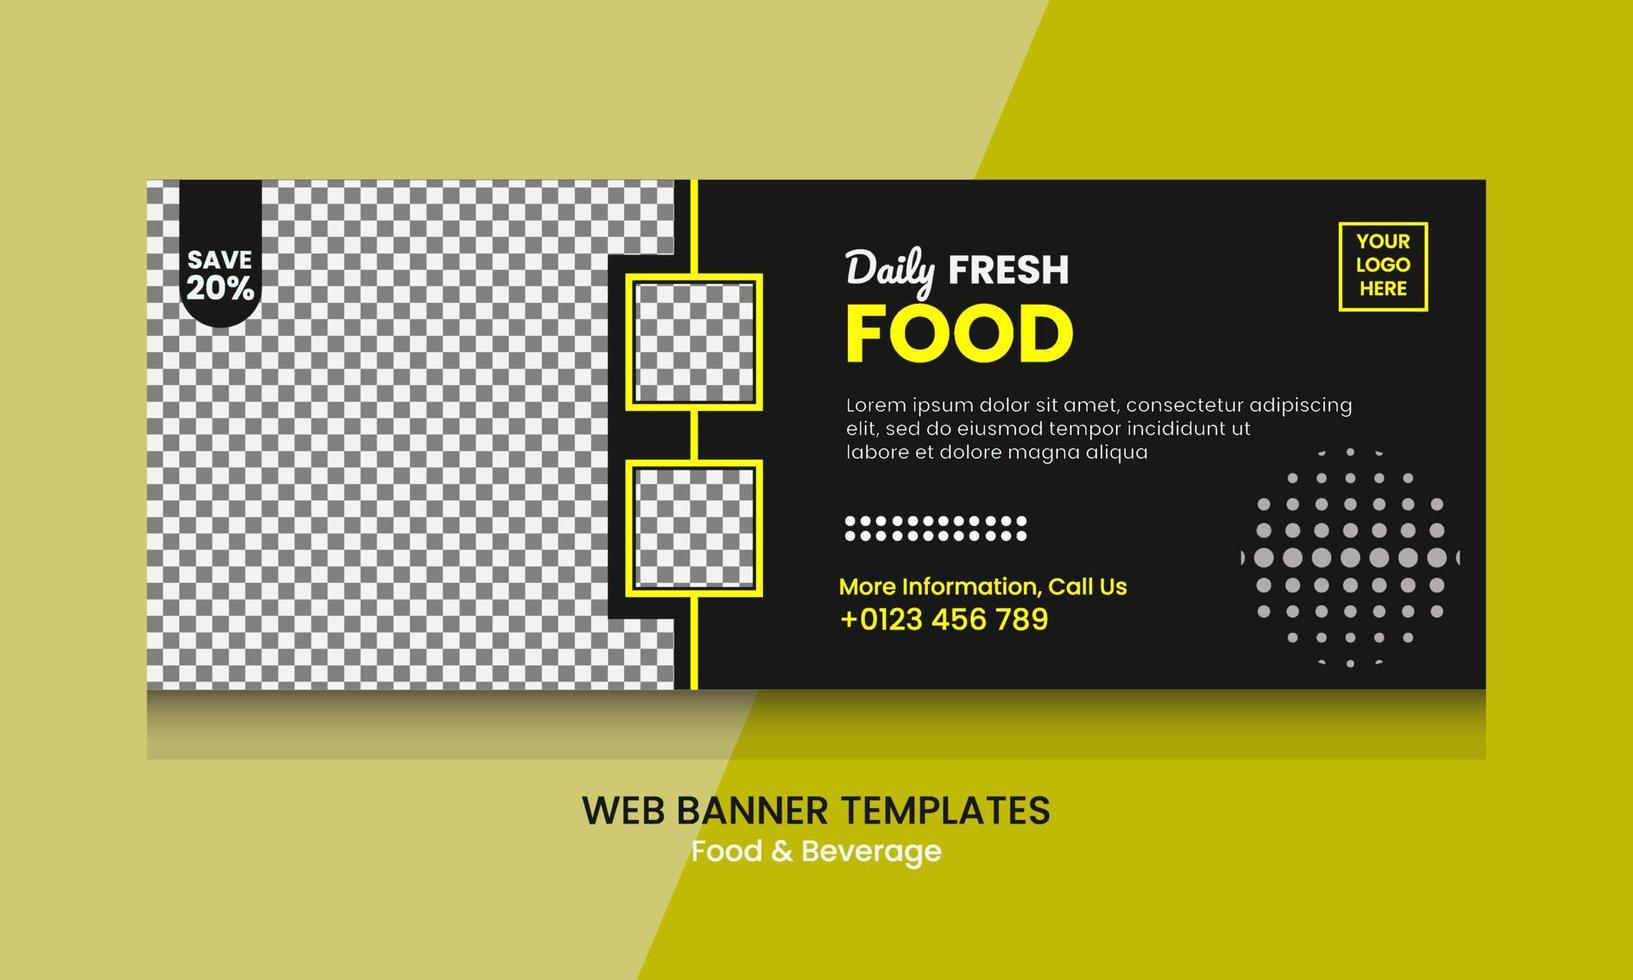 Vector graphic of web banner design with black, yellow and white color scheme.